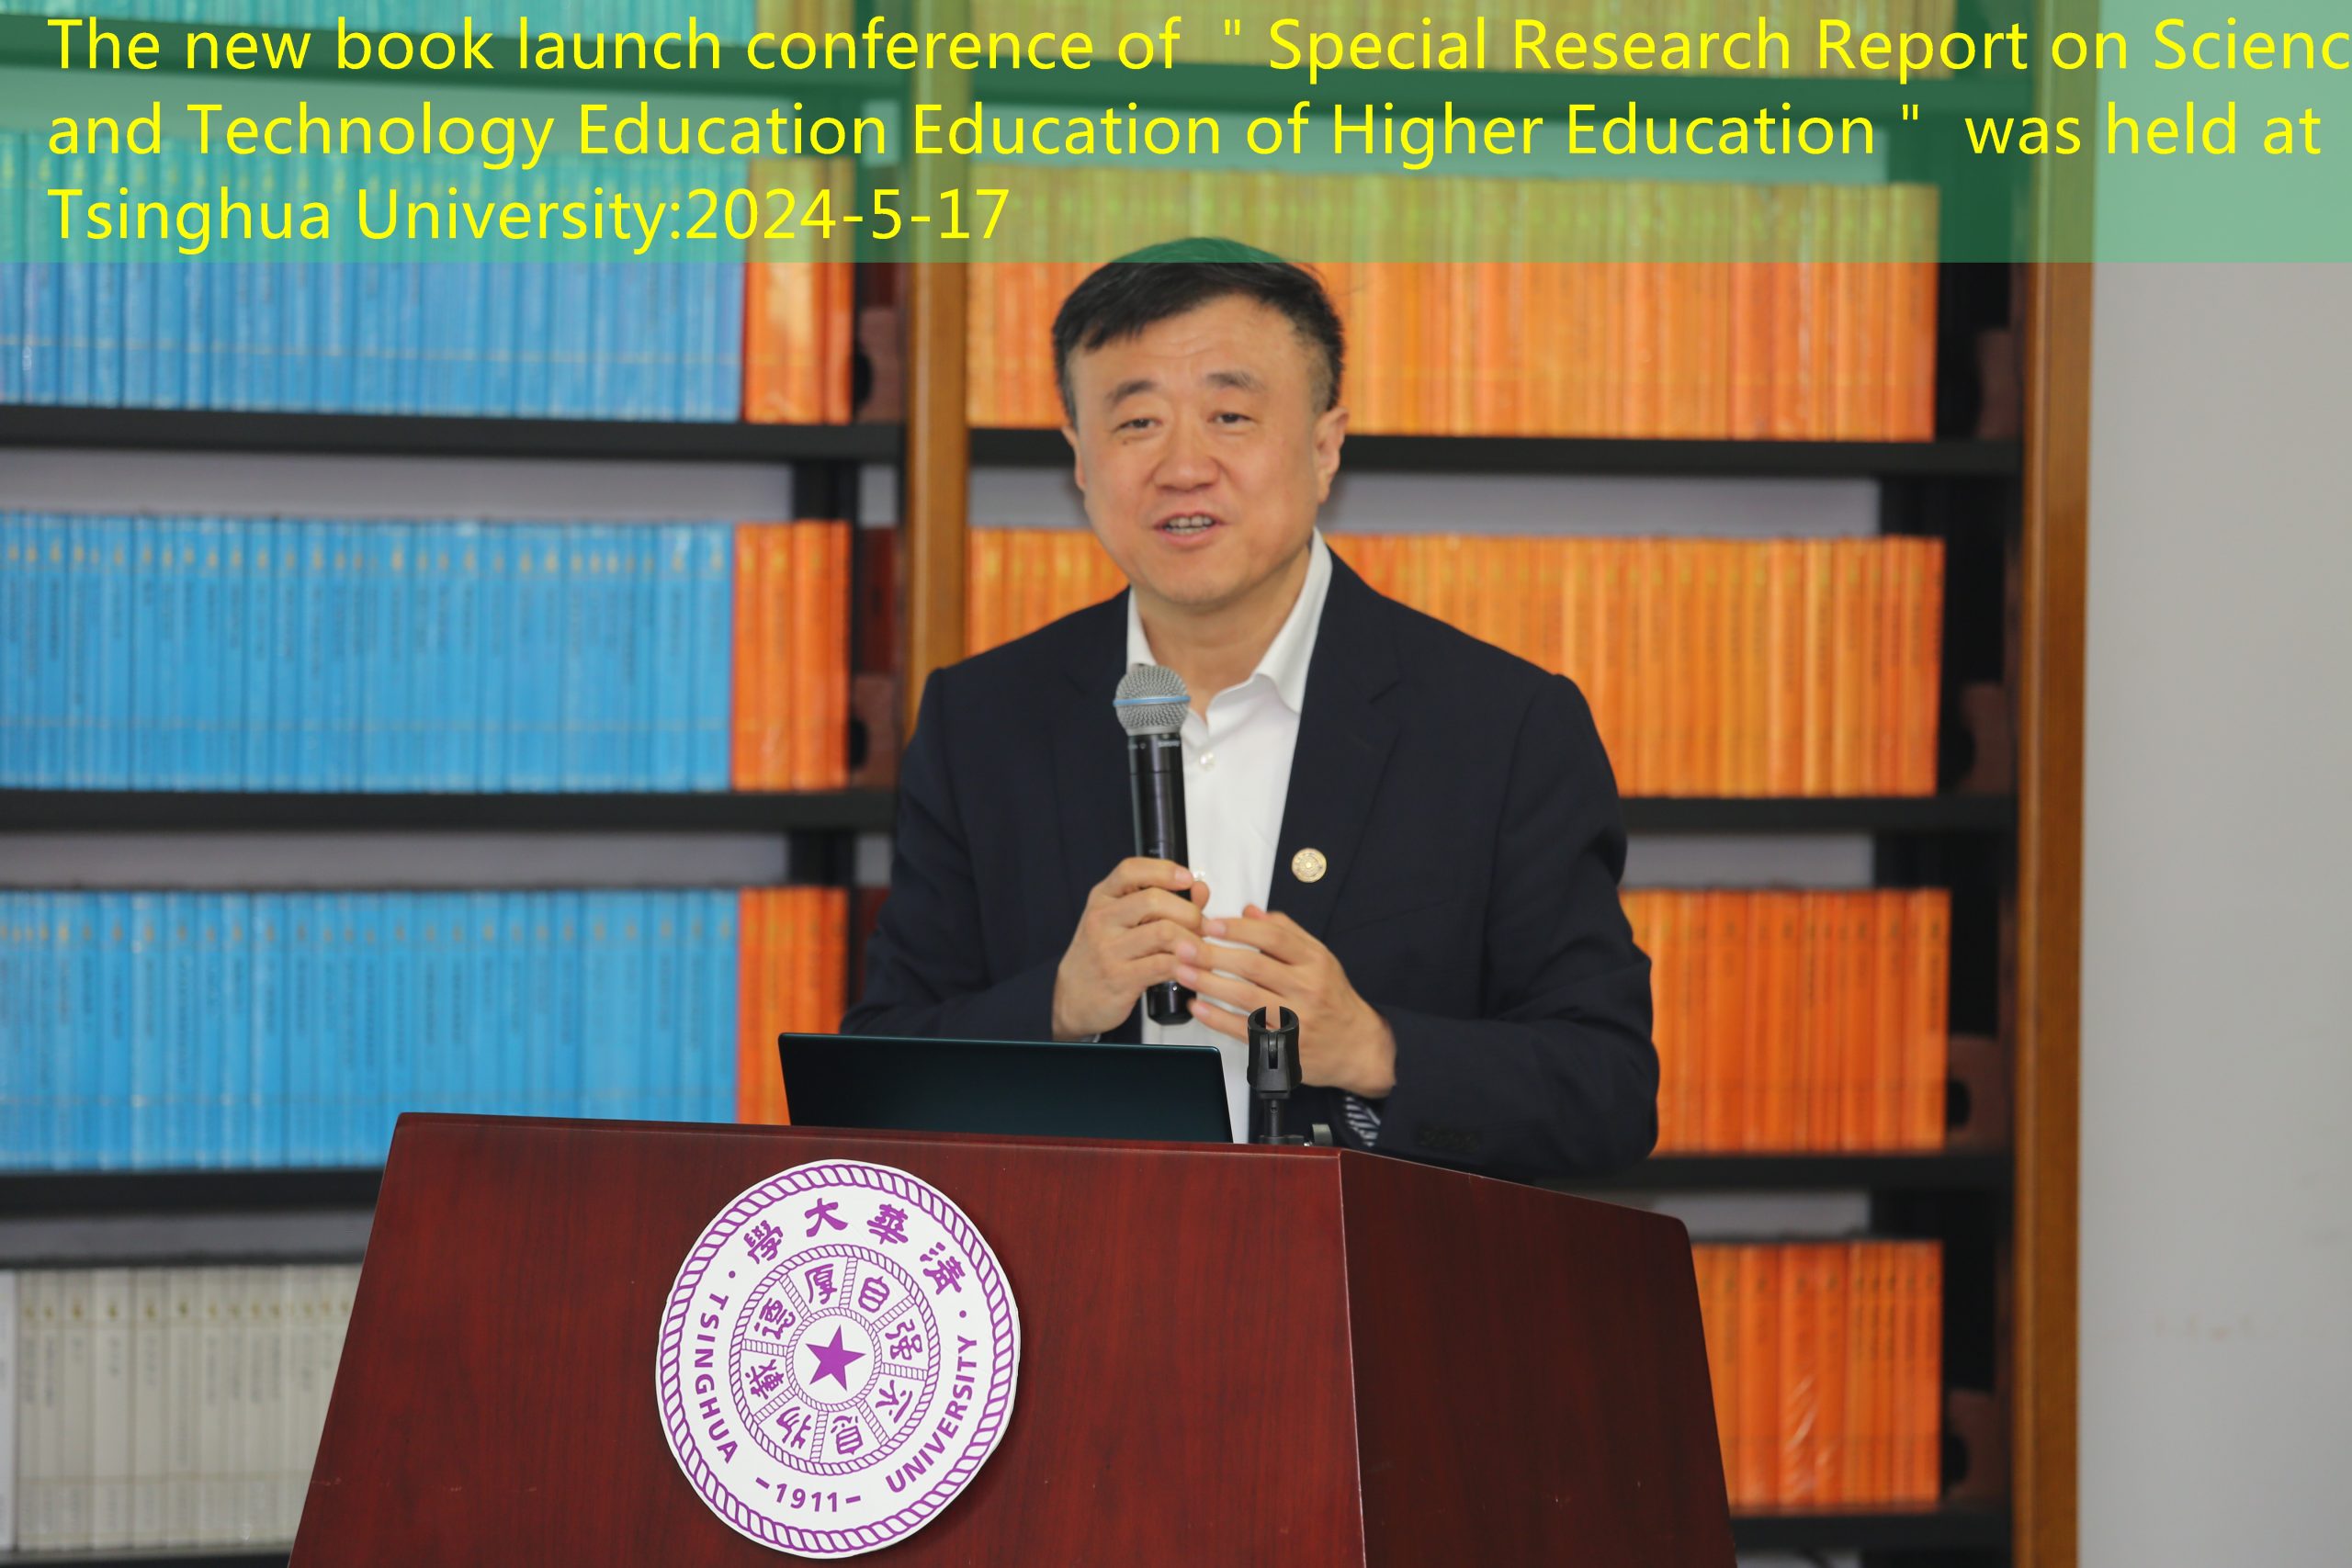 The new book launch conference of ＂Special Research Report on Science and Technology Education Education of Higher Education＂ was held at Tsinghua University